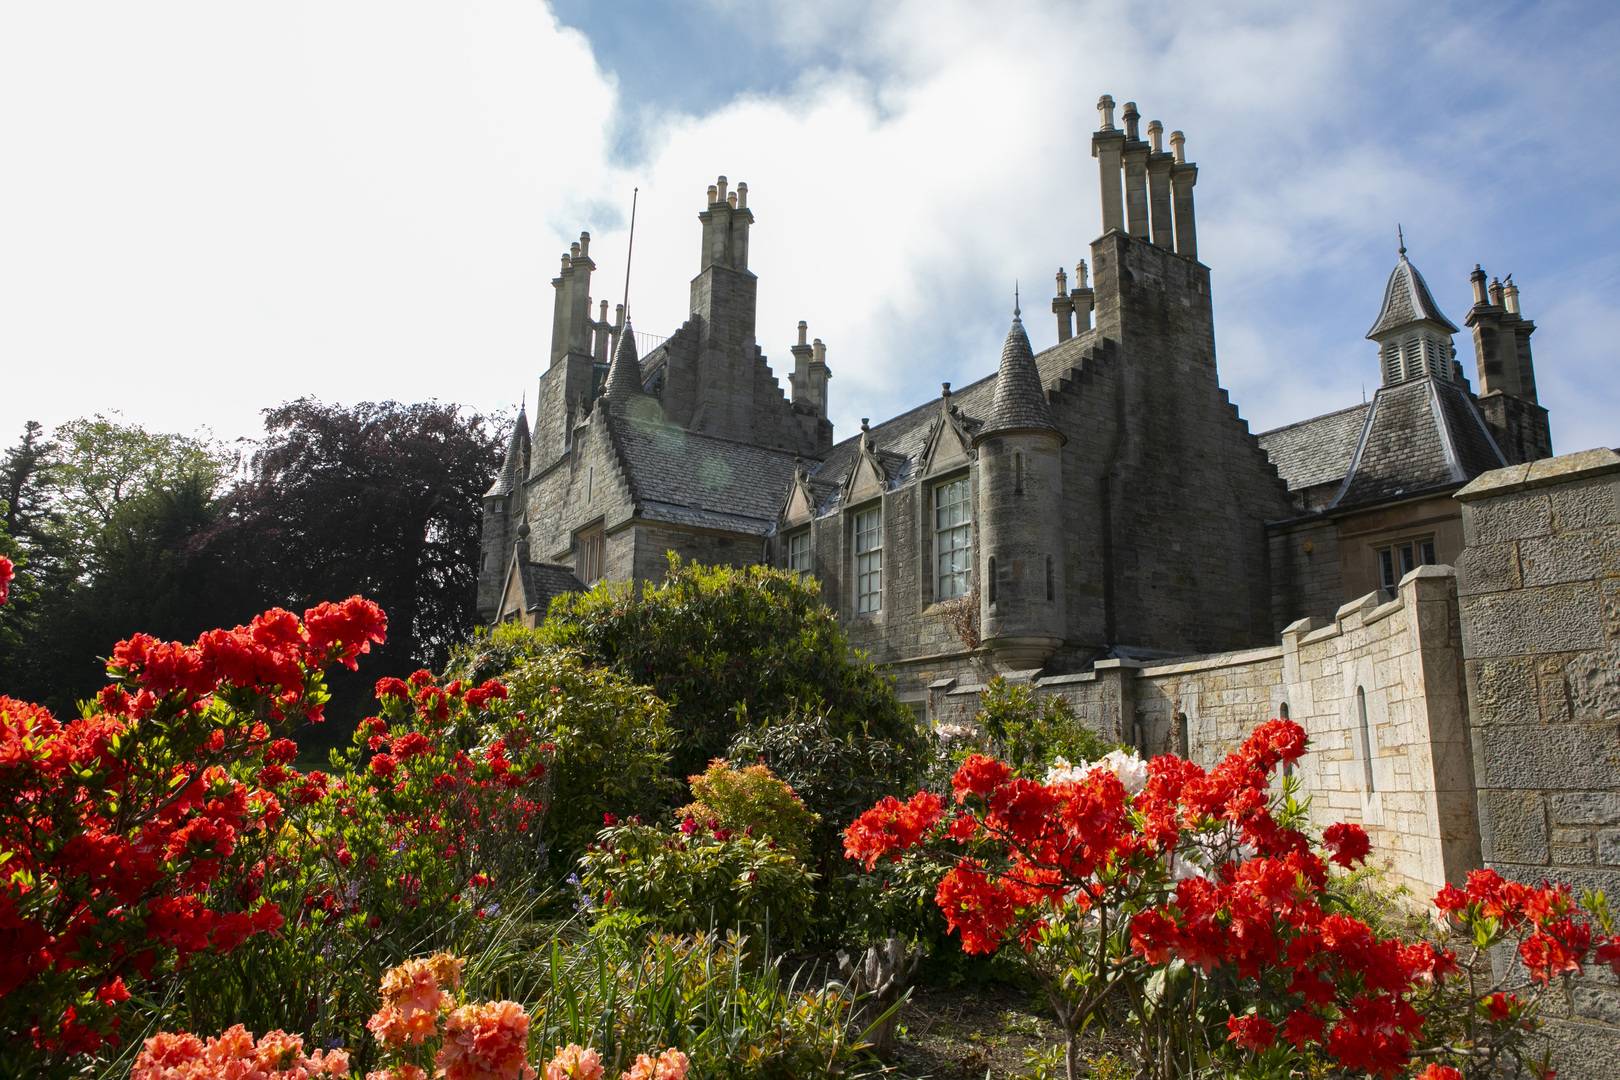 Picture of Lauriston castle with red flowers on the bottom of the frame